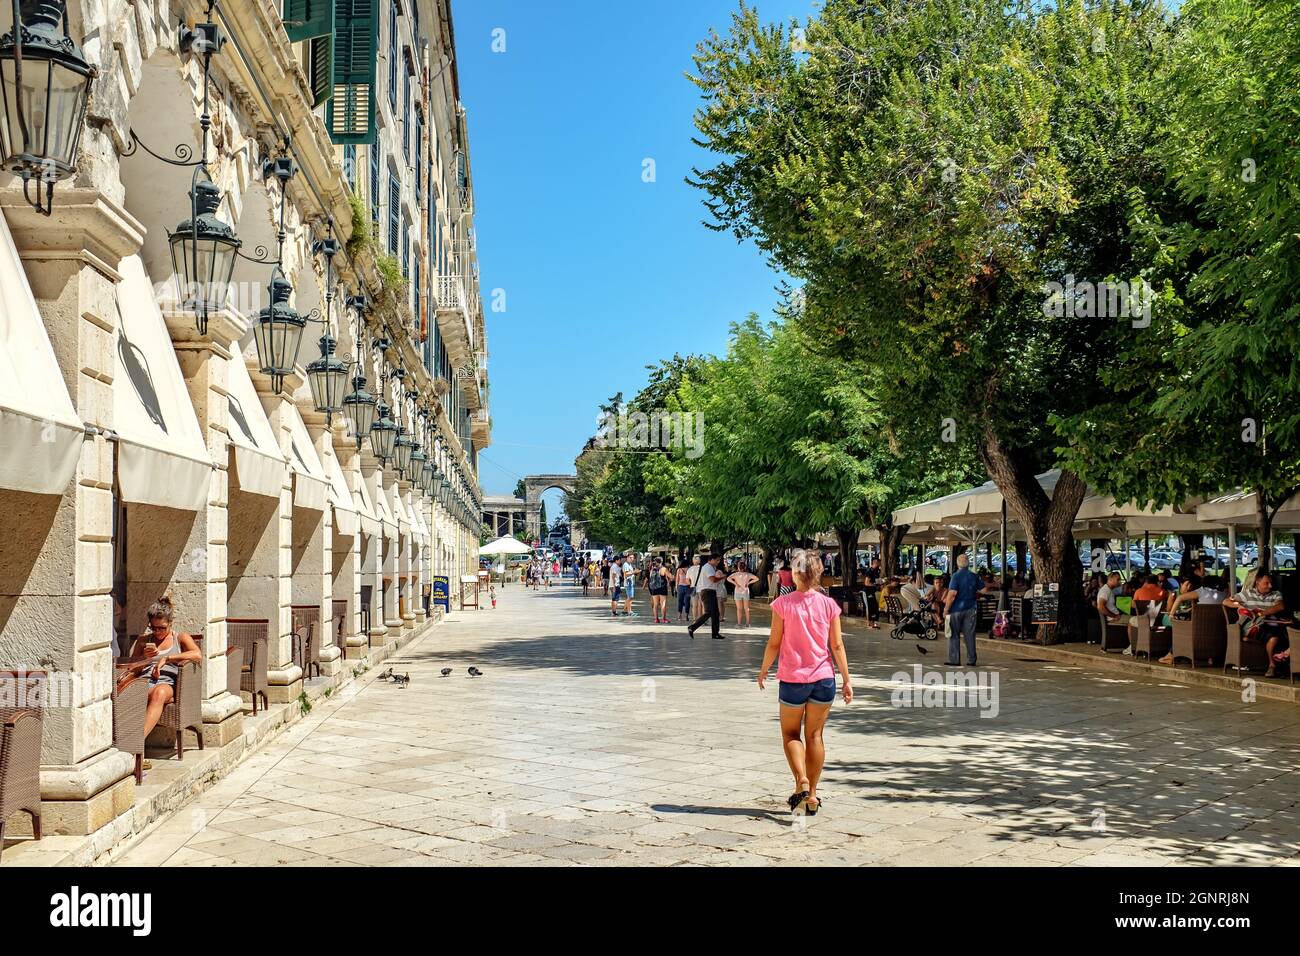 Corfu town, corfu, Greece, August 1 2014 main promenade in corfu town with the cafes and restaurants full of tourists Stock Photo